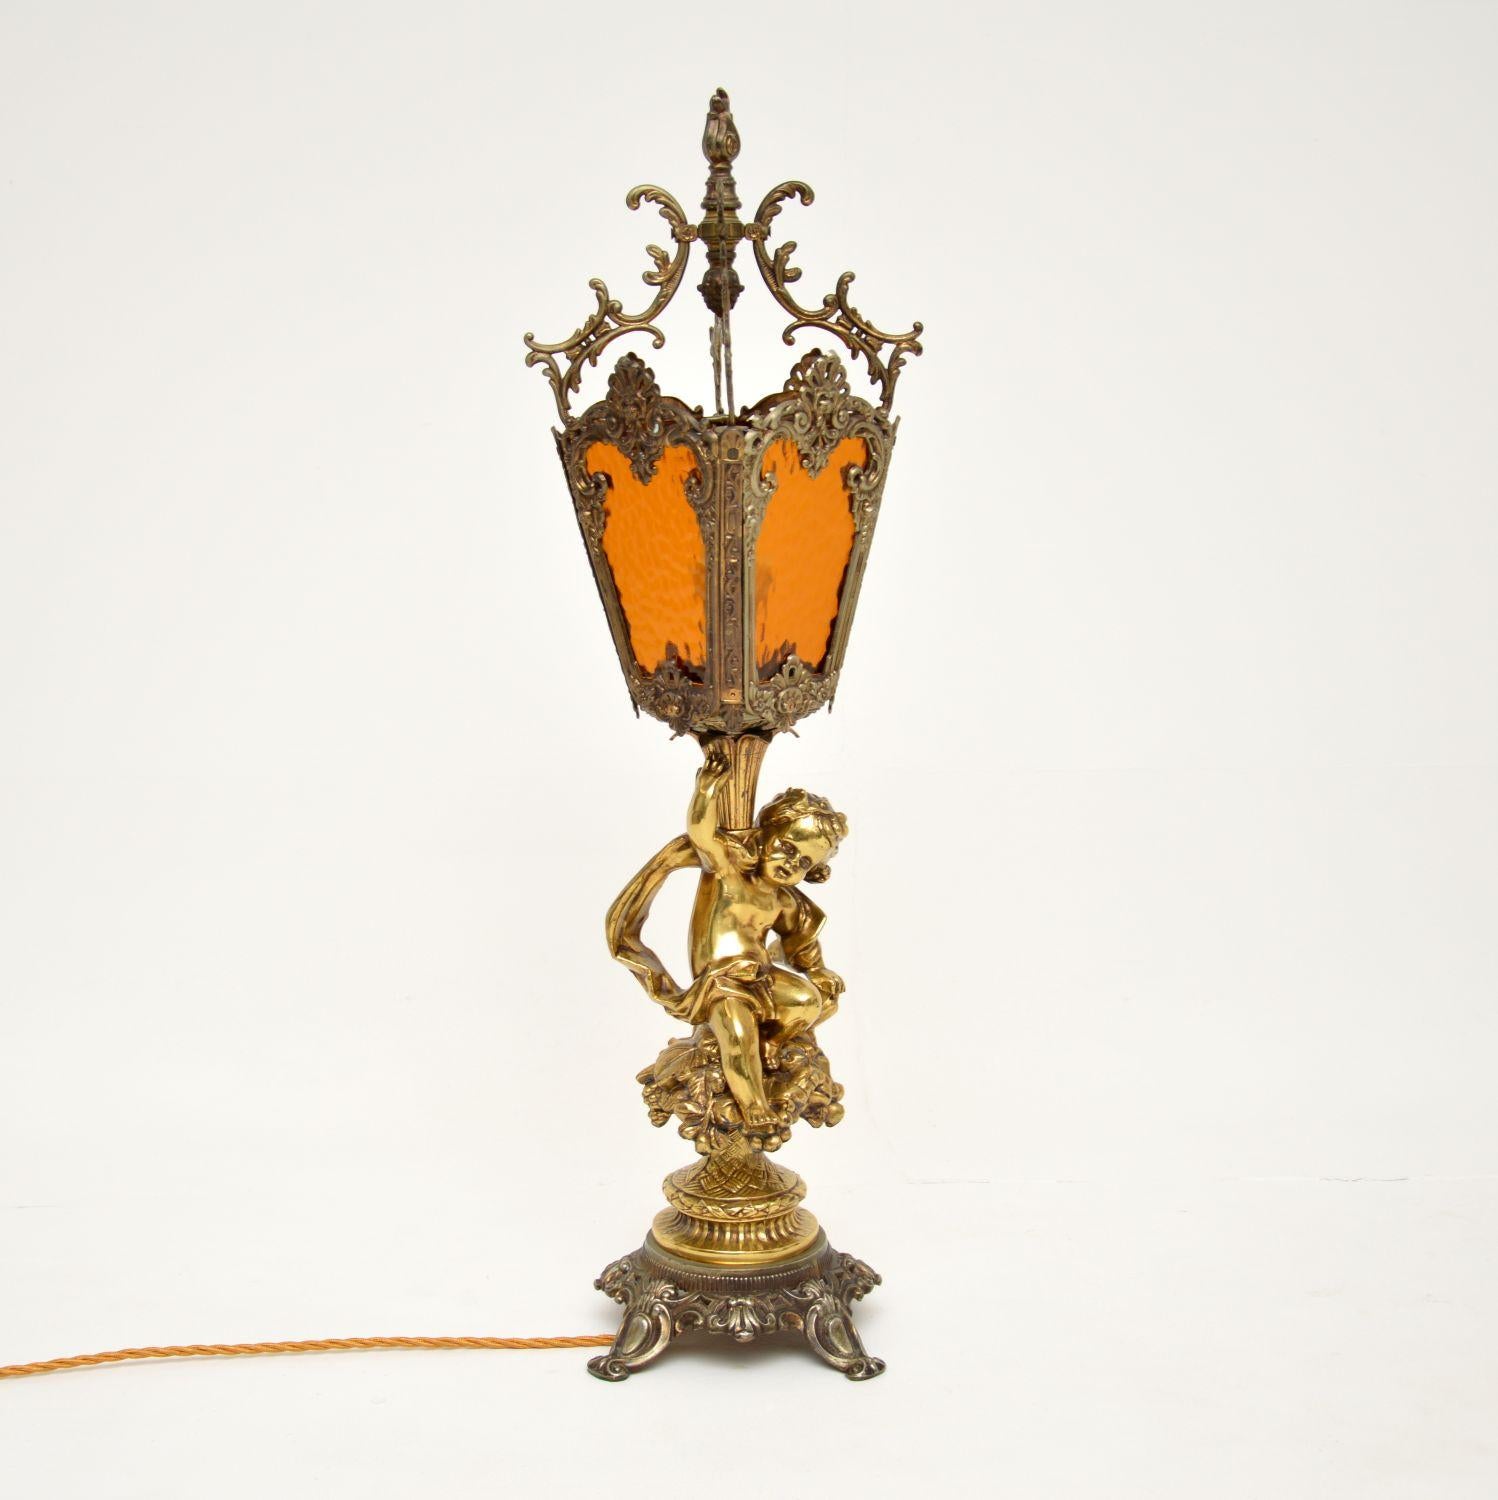 A large and stunning antique table lamp in gilt metal & brass, with original textured glass shade inserts. We believe it’s French & dates from around the 1930-50’s period.

It is of absolutely wonderful quality, with beautiful details all over.